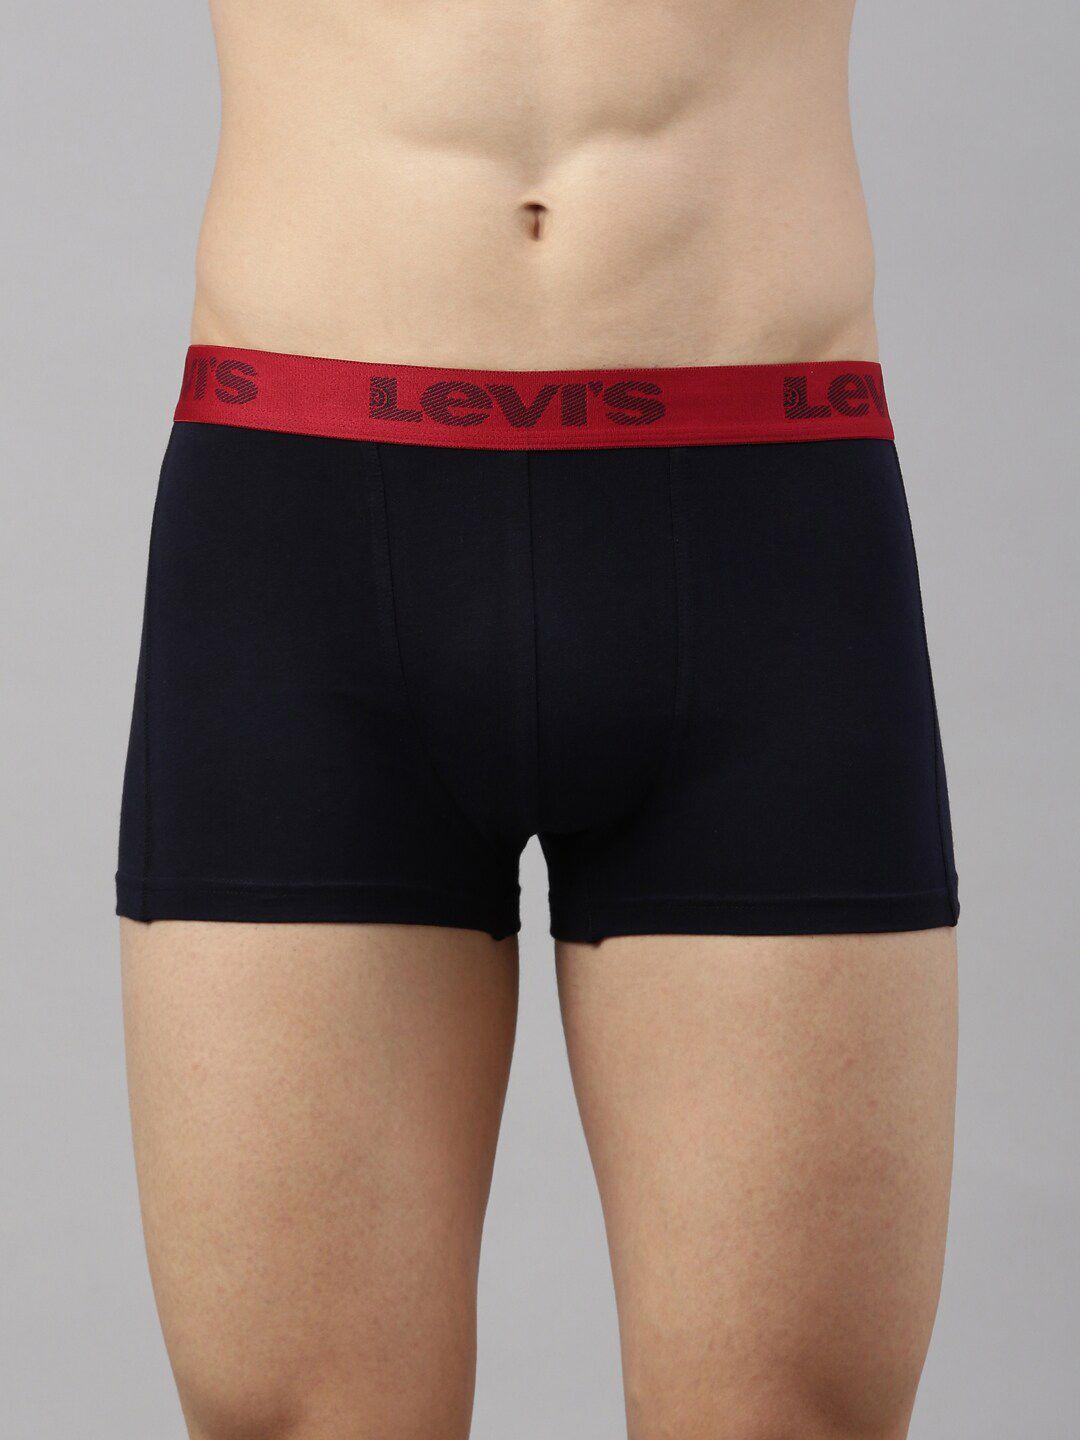 levis-men-smartskin-technology-active-trunks-with-tag-free-comfort-#067